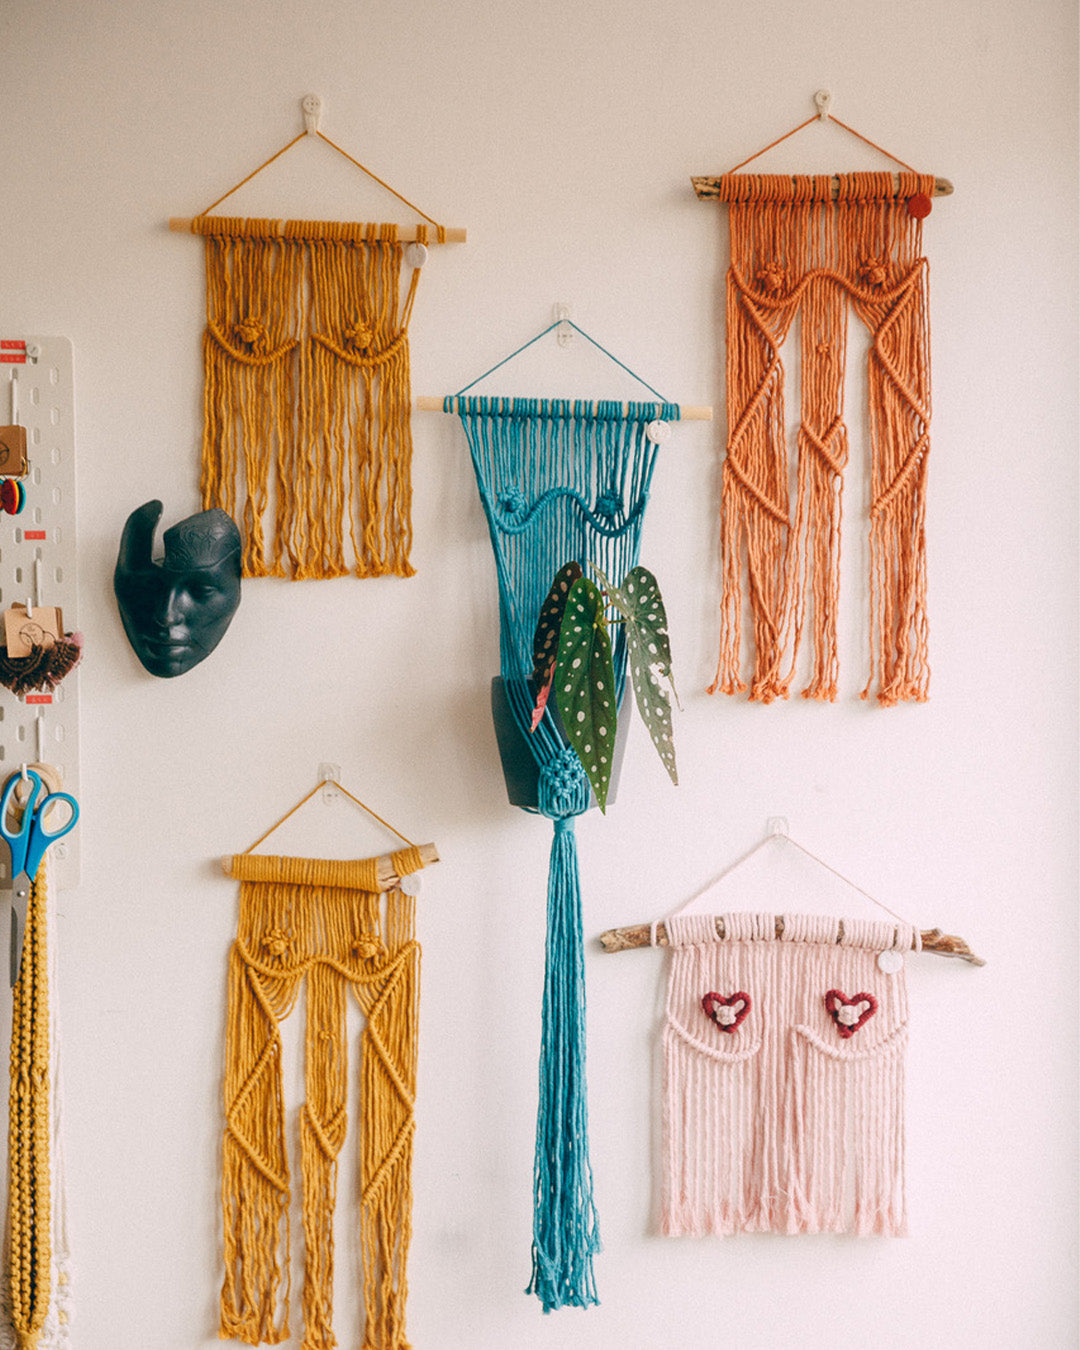 A collection of yarn wall hangings in warm hues displayed on a white wall, featuring playful patterns and varying textures that exhibit Naomi's creative use of knit and macramé techniques.